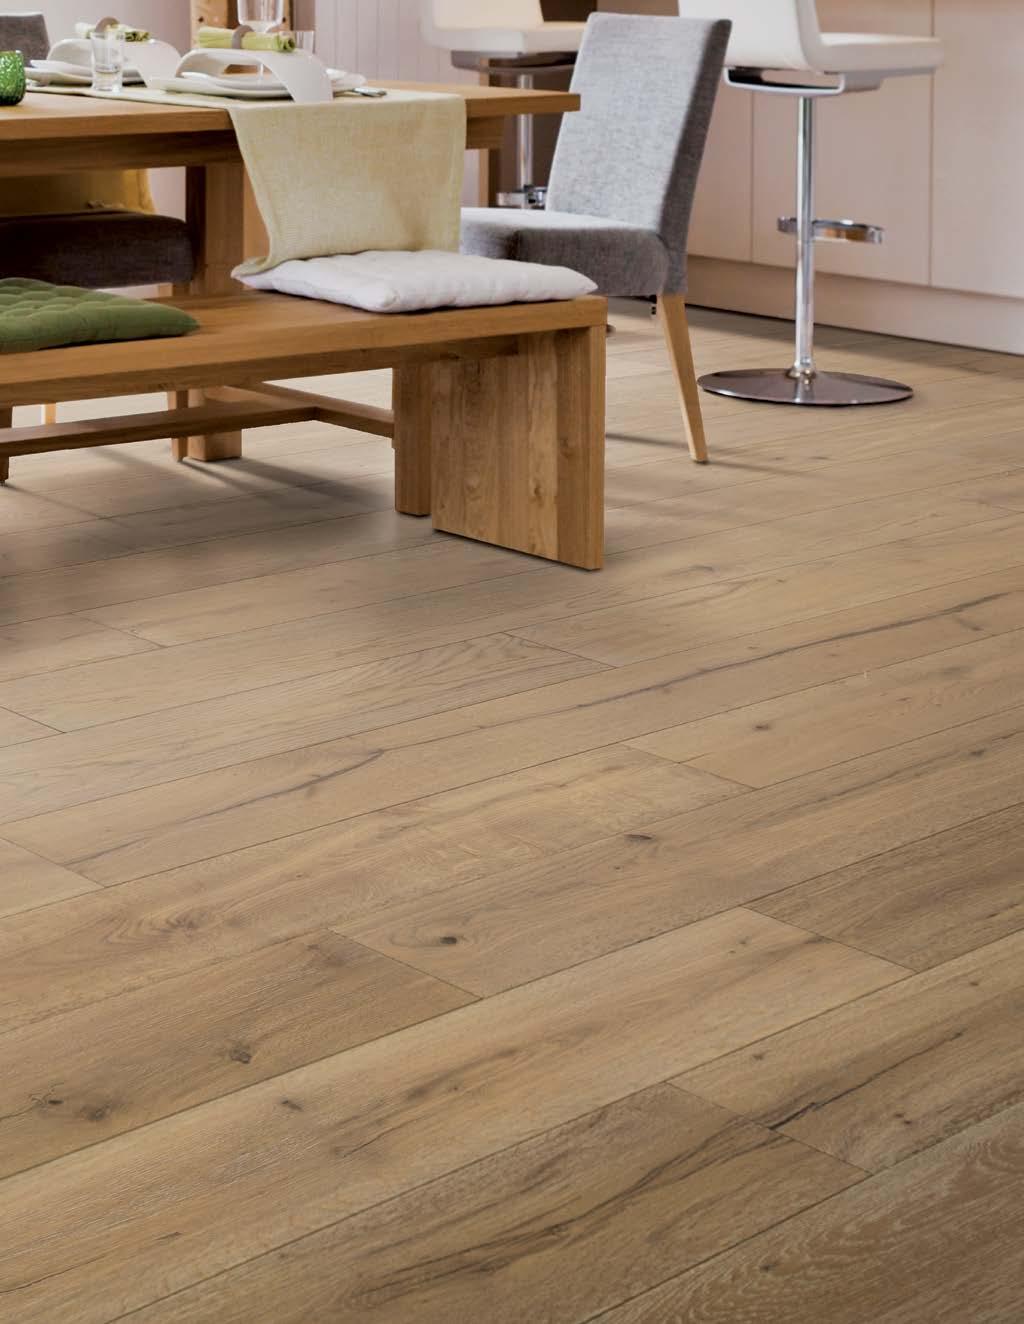 erno Ferno s age reclaimed hardwood flooring maintains the true representation of European Oak by highlighting natural distressing, character, and thermal treatments.